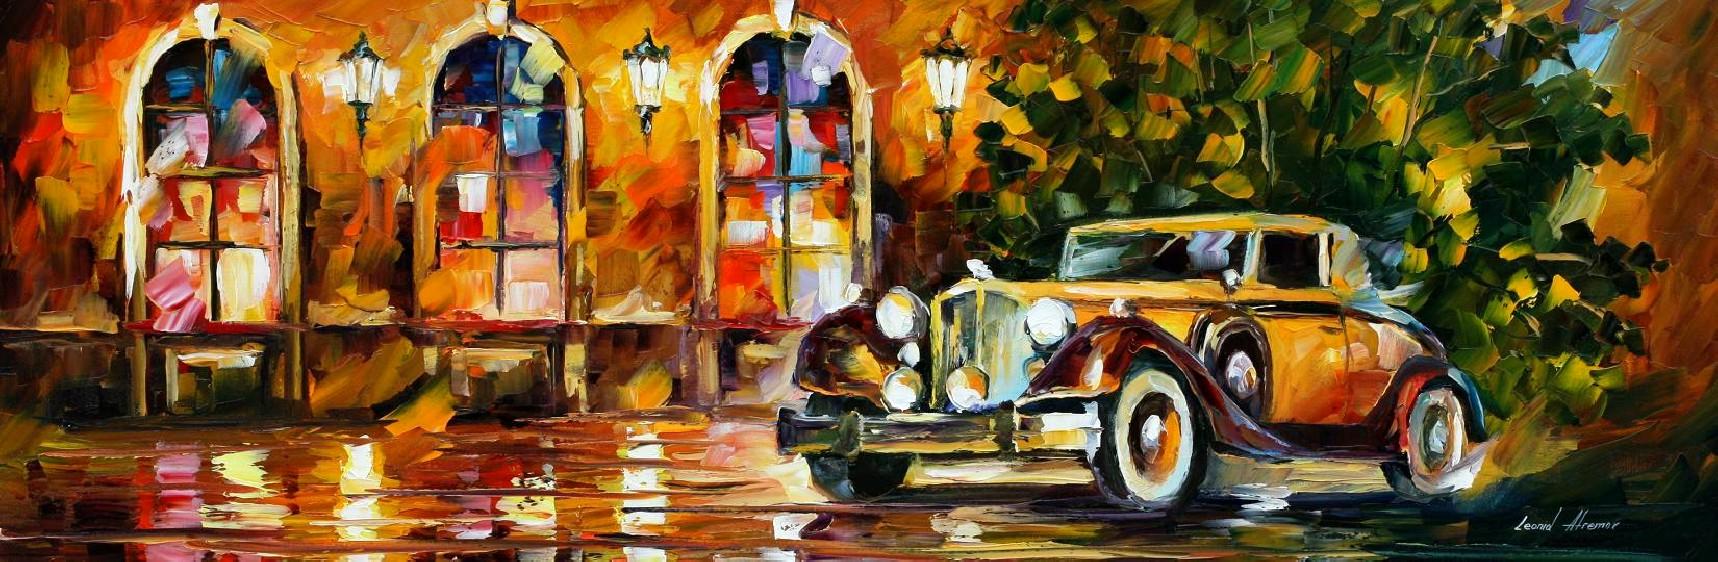 Modern impressionism palette knife oil painting City057